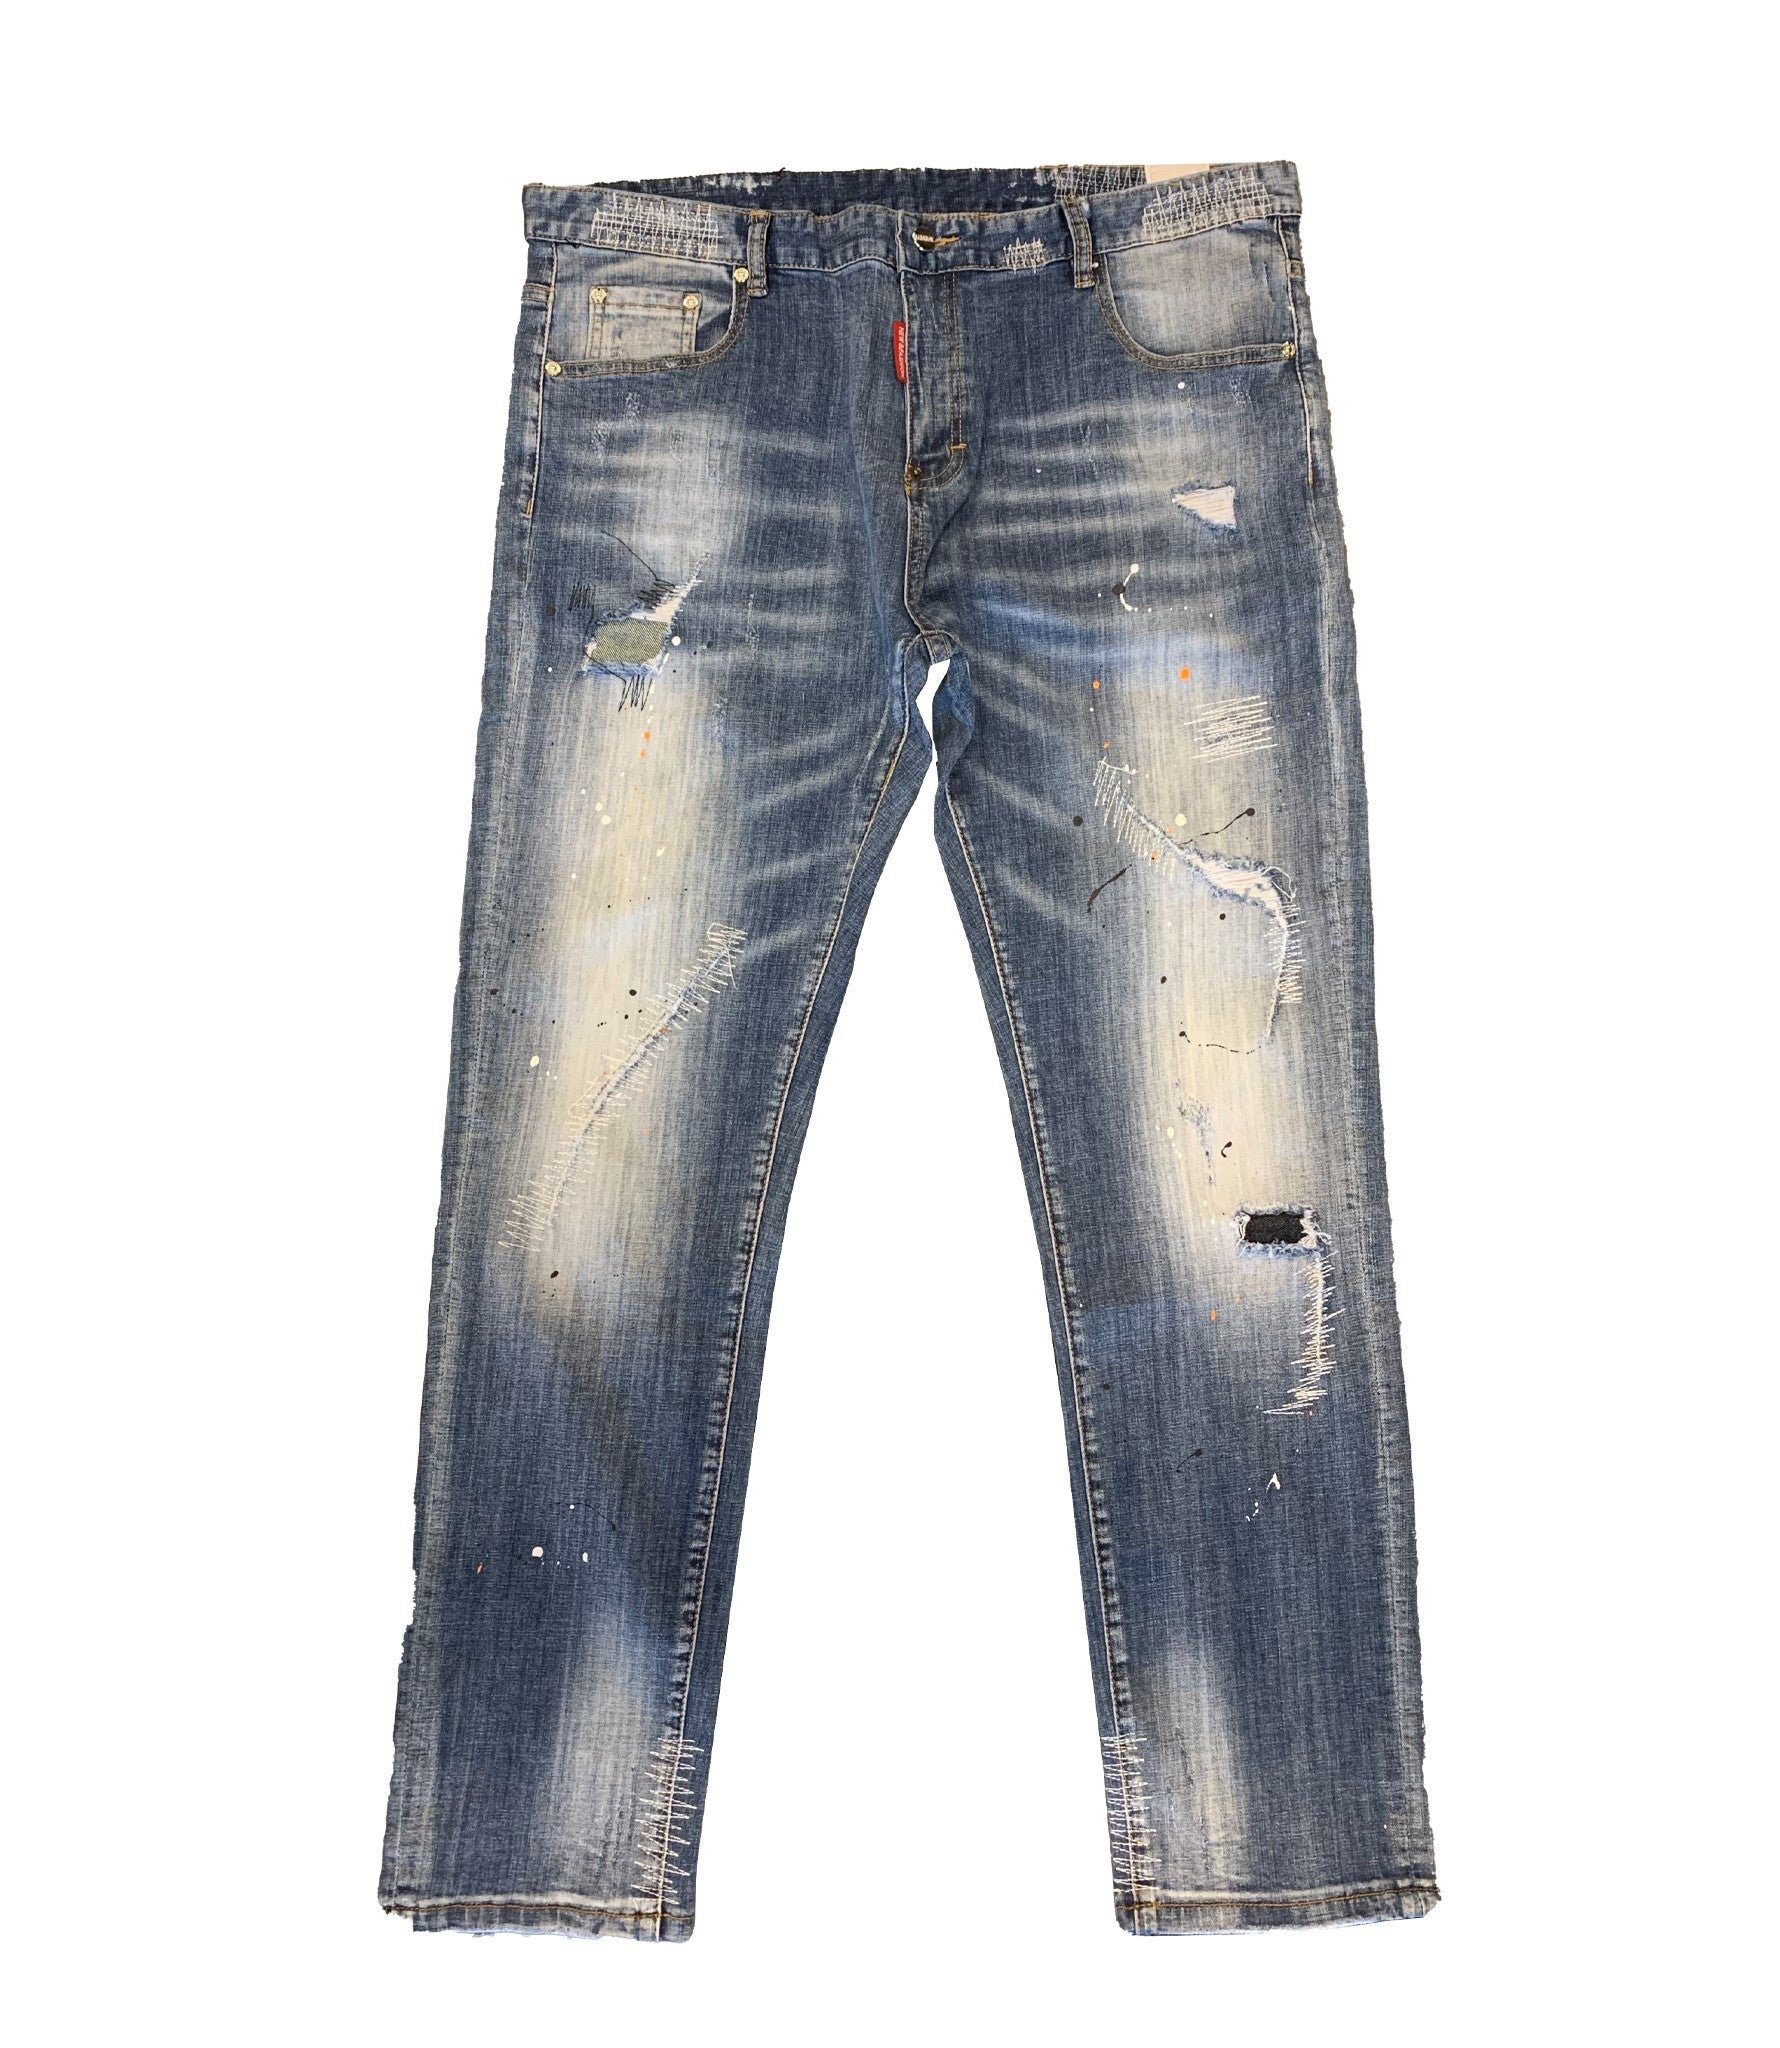 Painted Mens Ripped Jeans